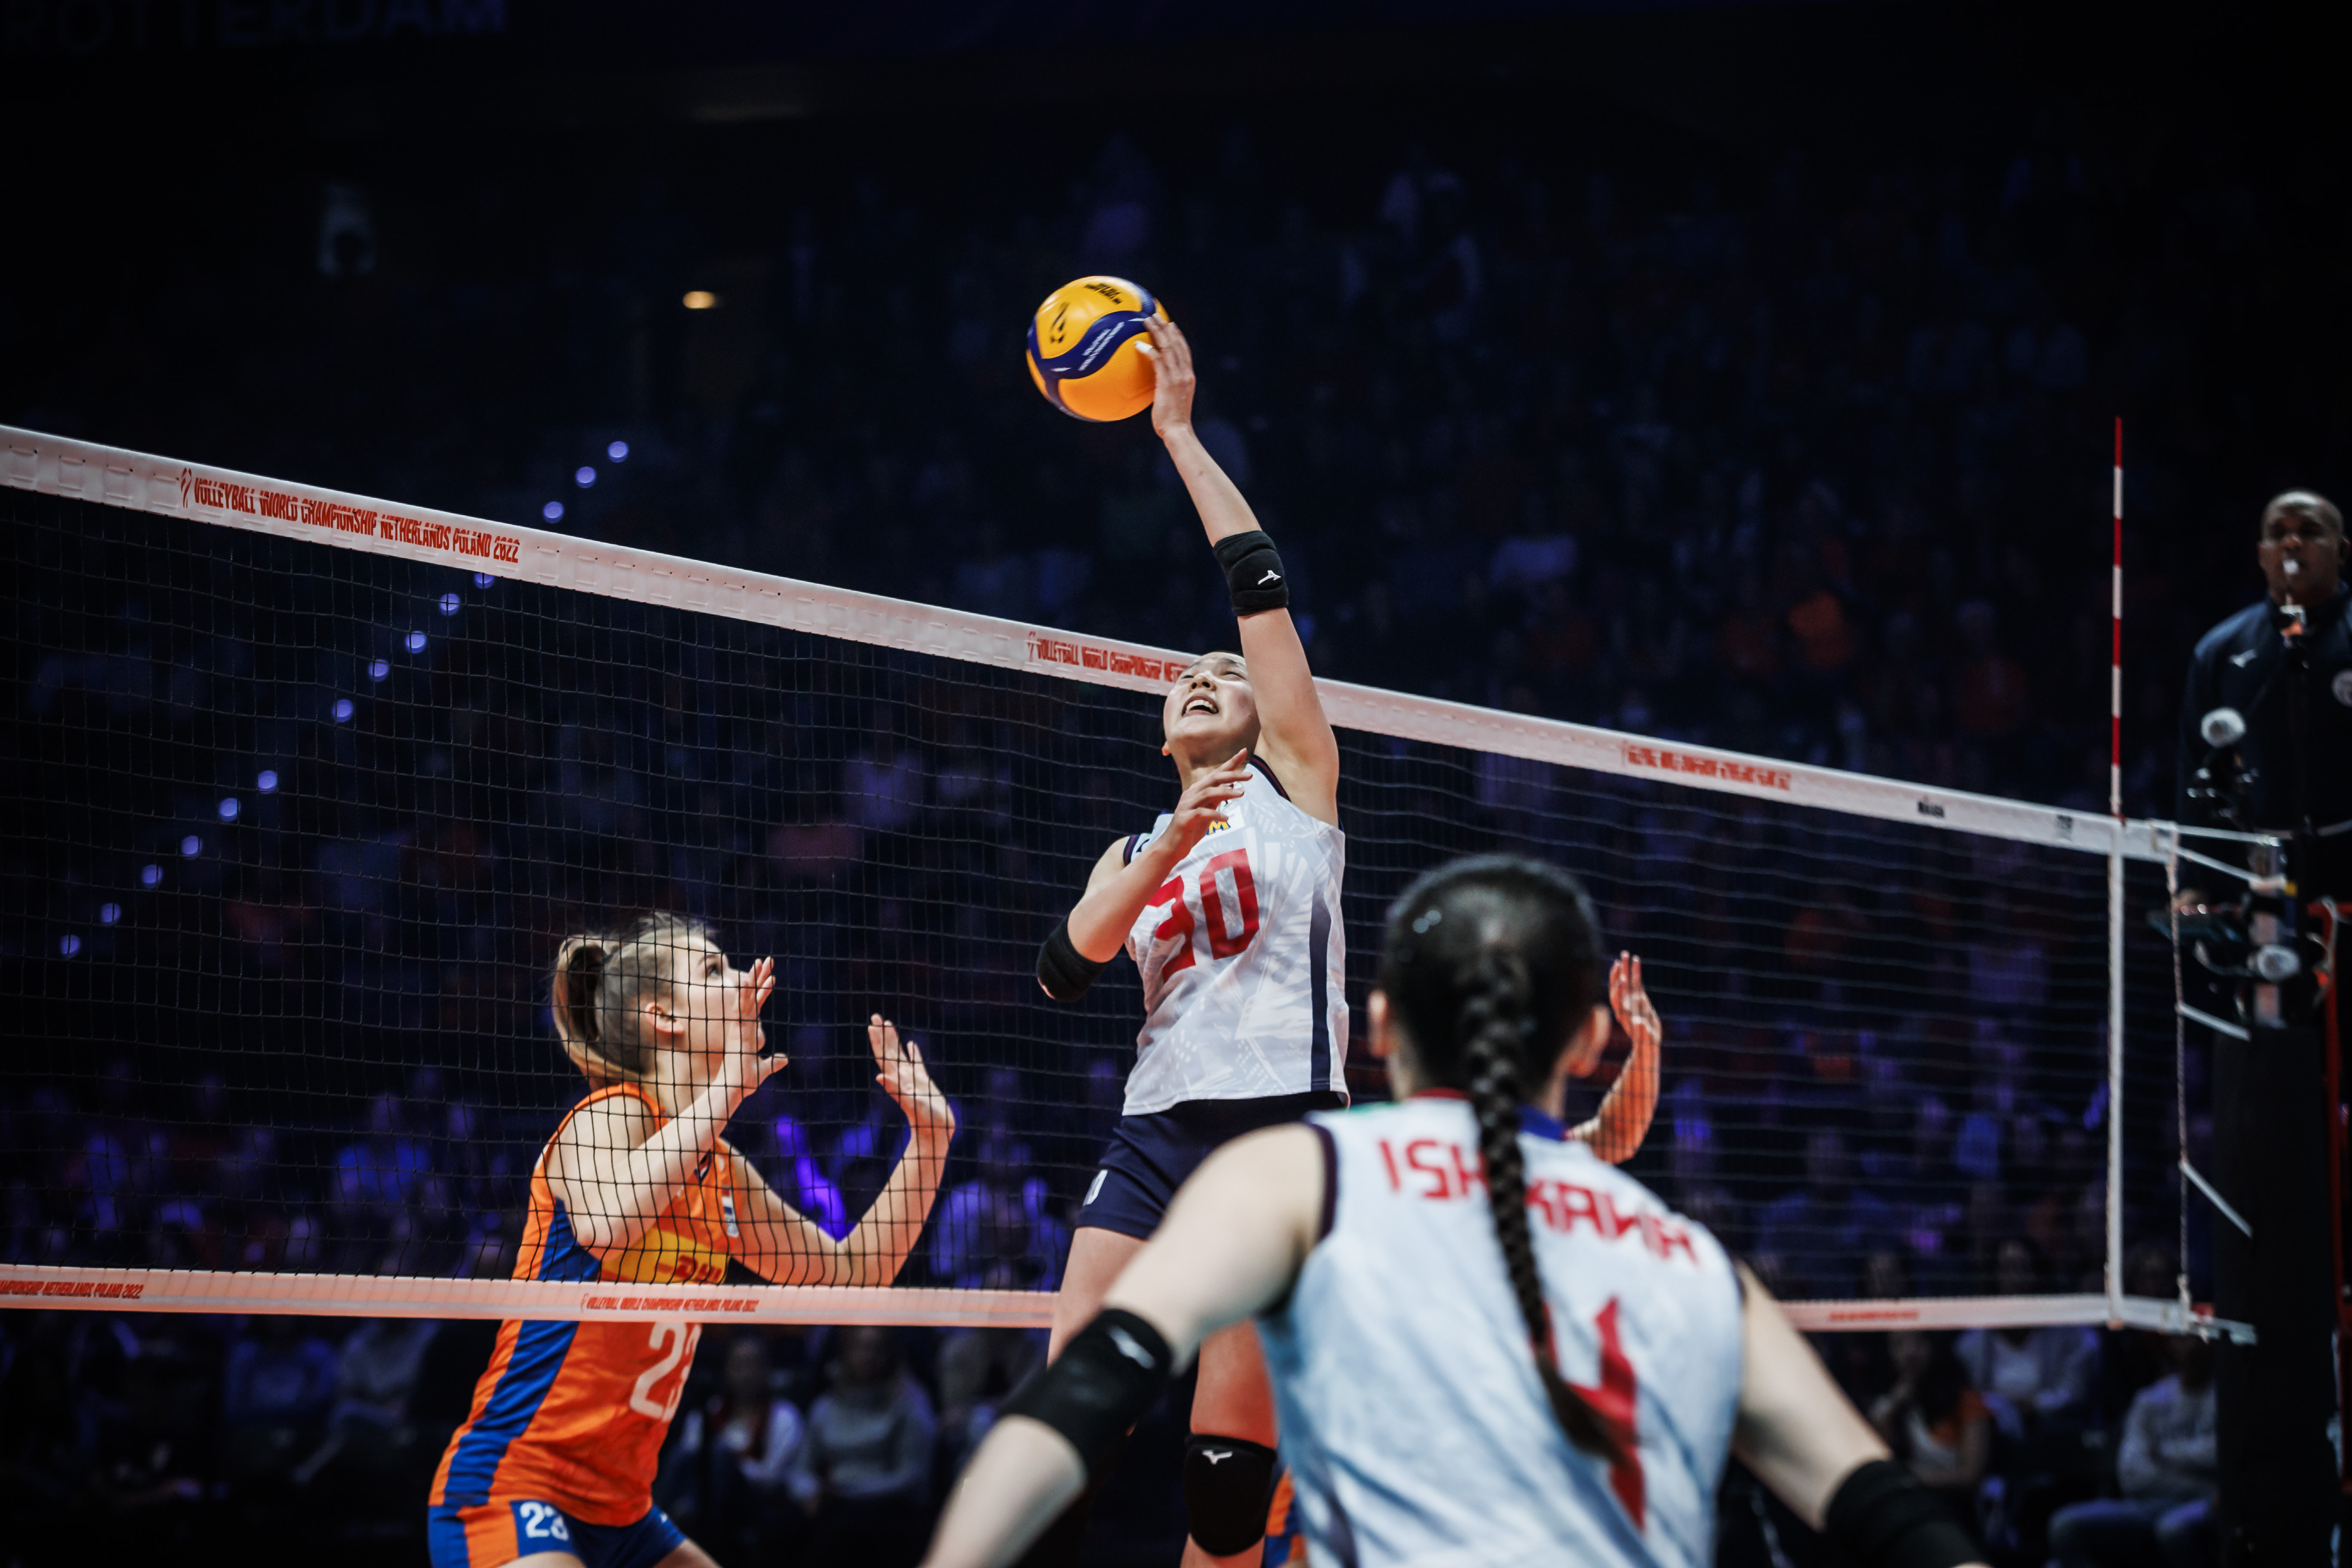 World Championship quarterfinals set with exciting duels to look forward to volleyballworld